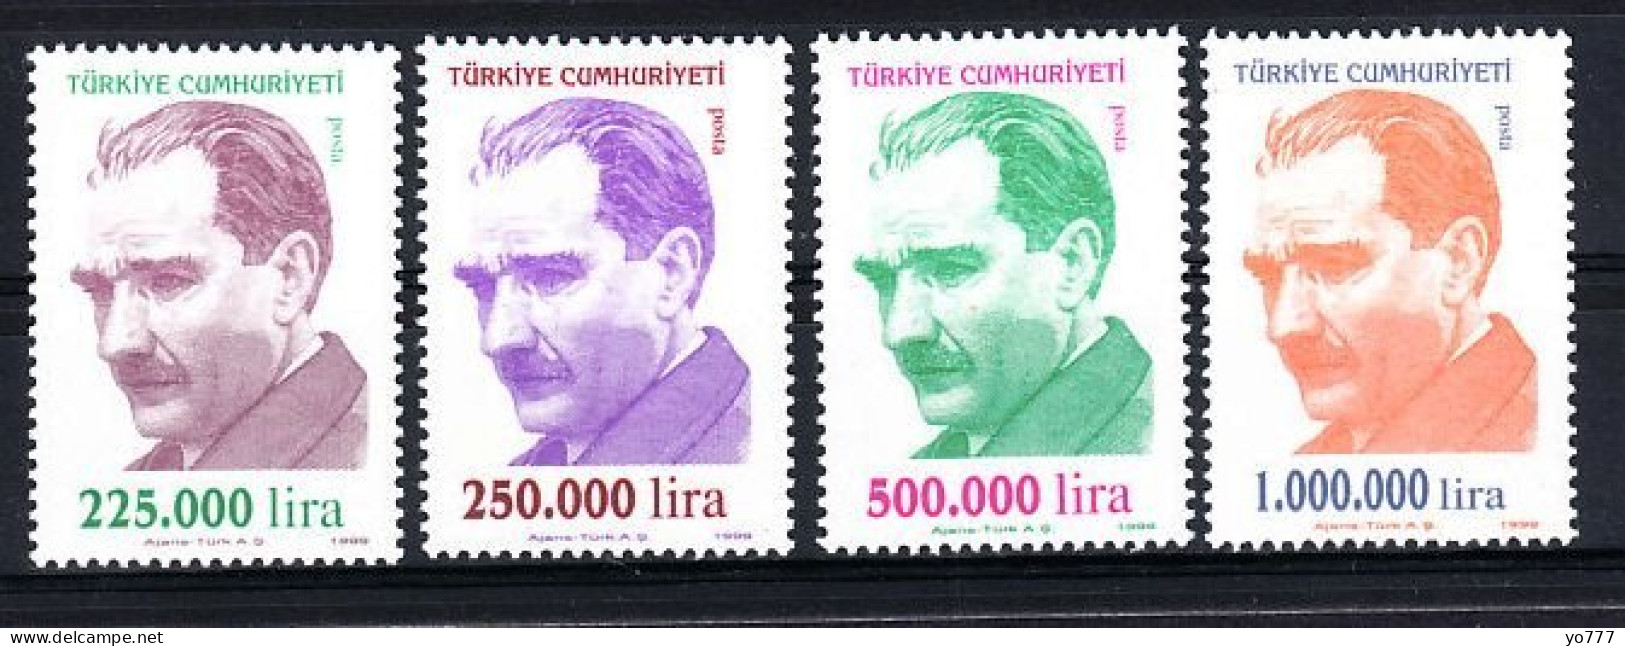 (3197-00) TURKEY REGULAR ISSUE STAMPS WITH THE PORTRAIT OF ATATURK MNH** - Unused Stamps